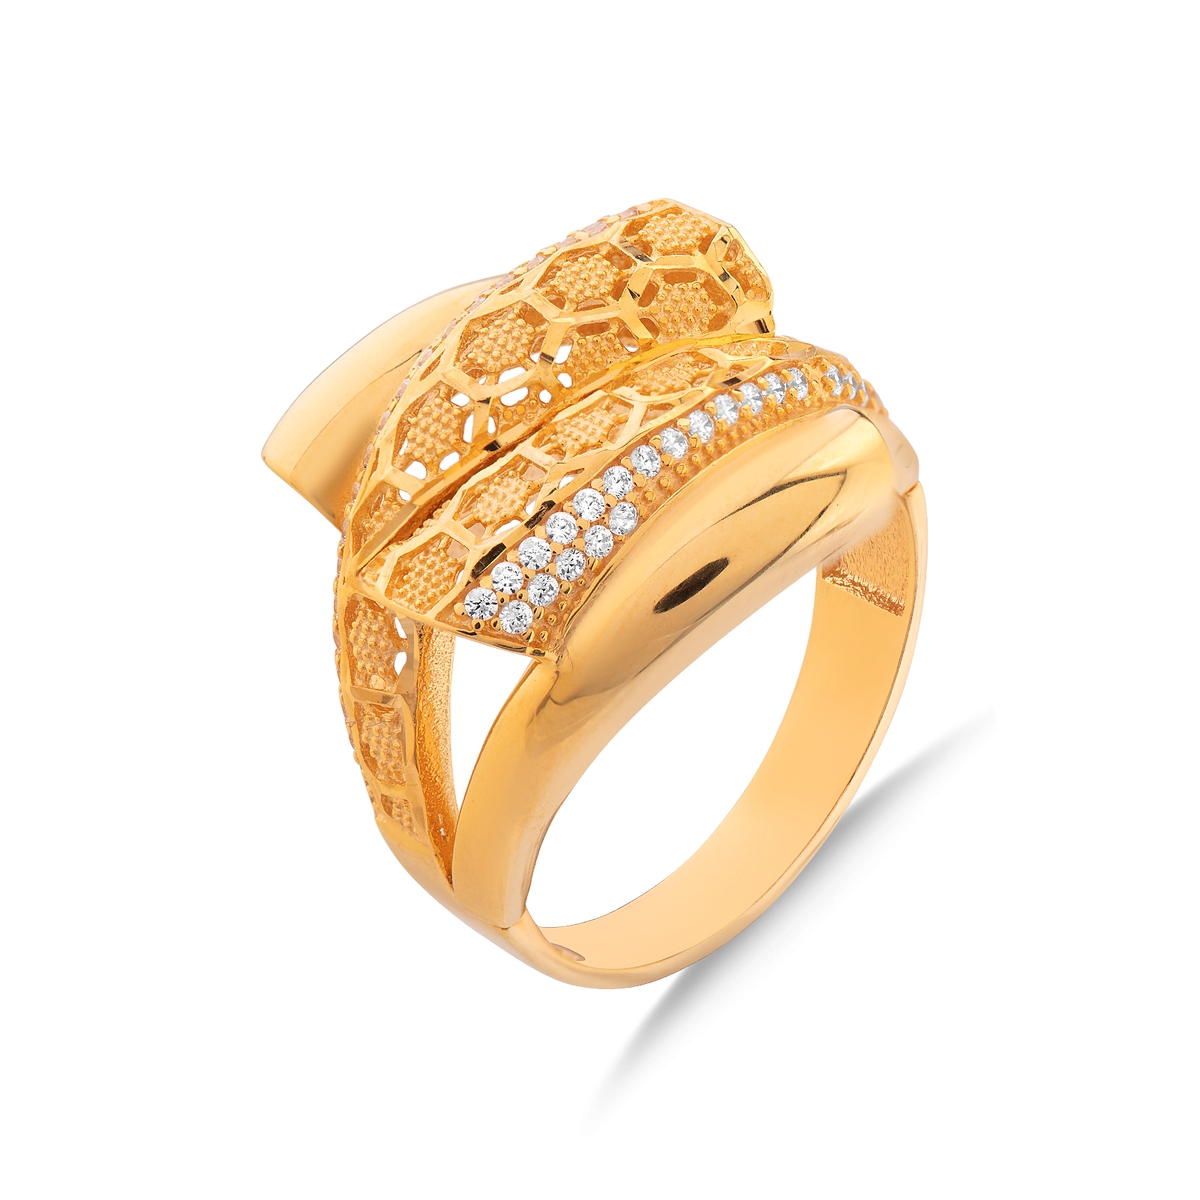 21K 0.410 ct Gold Ring With Stones